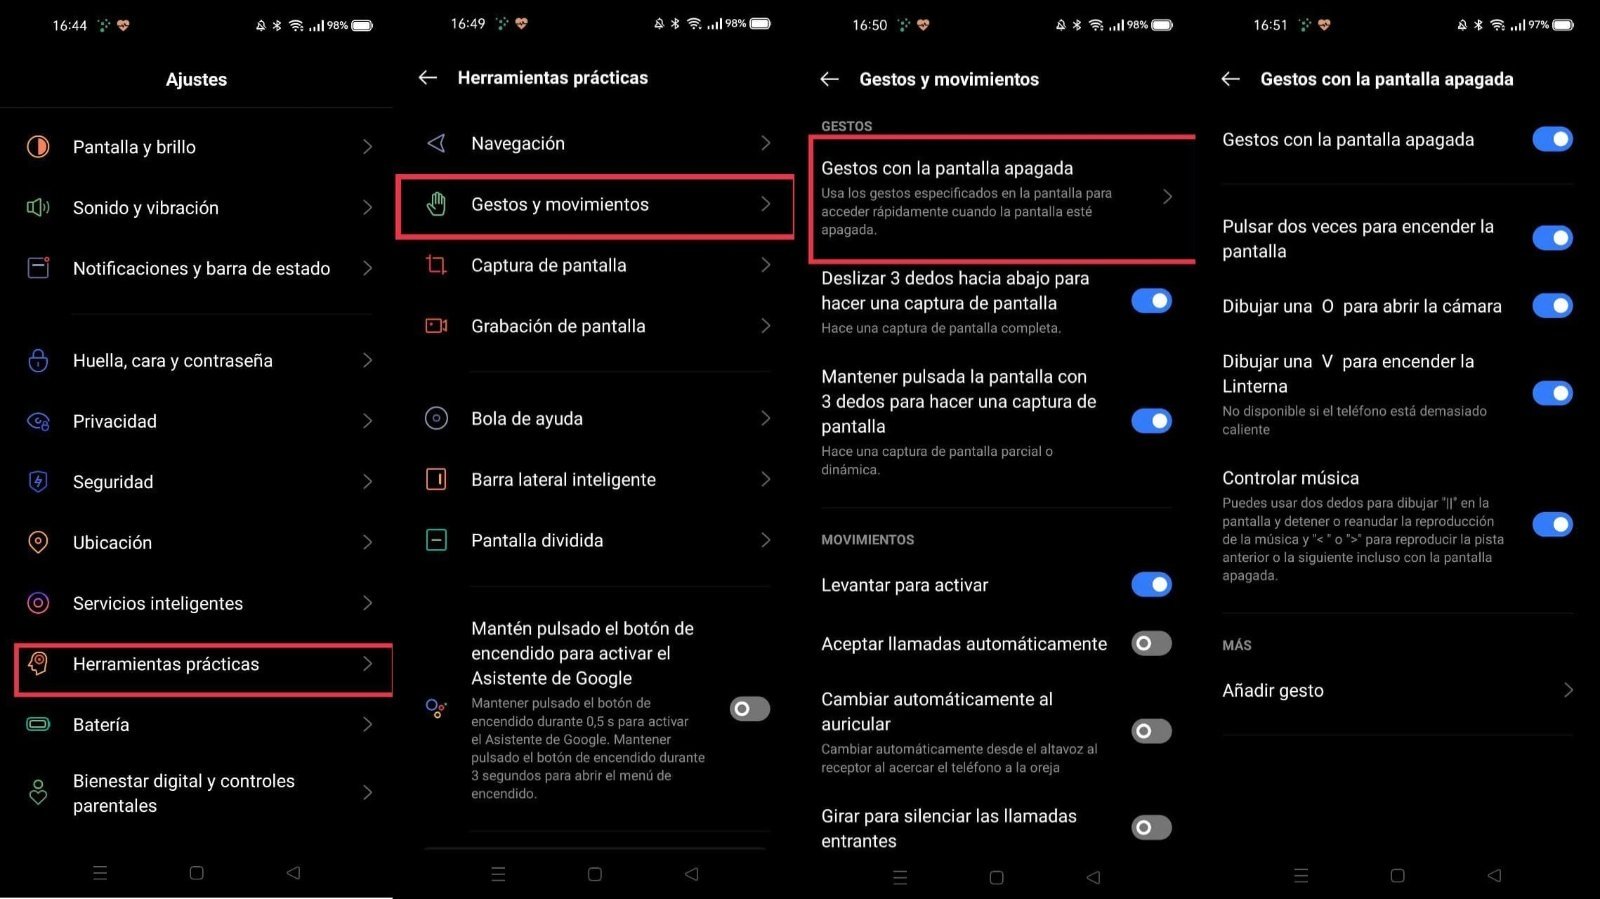 So you can activate the gestures with the screen off in realme UI